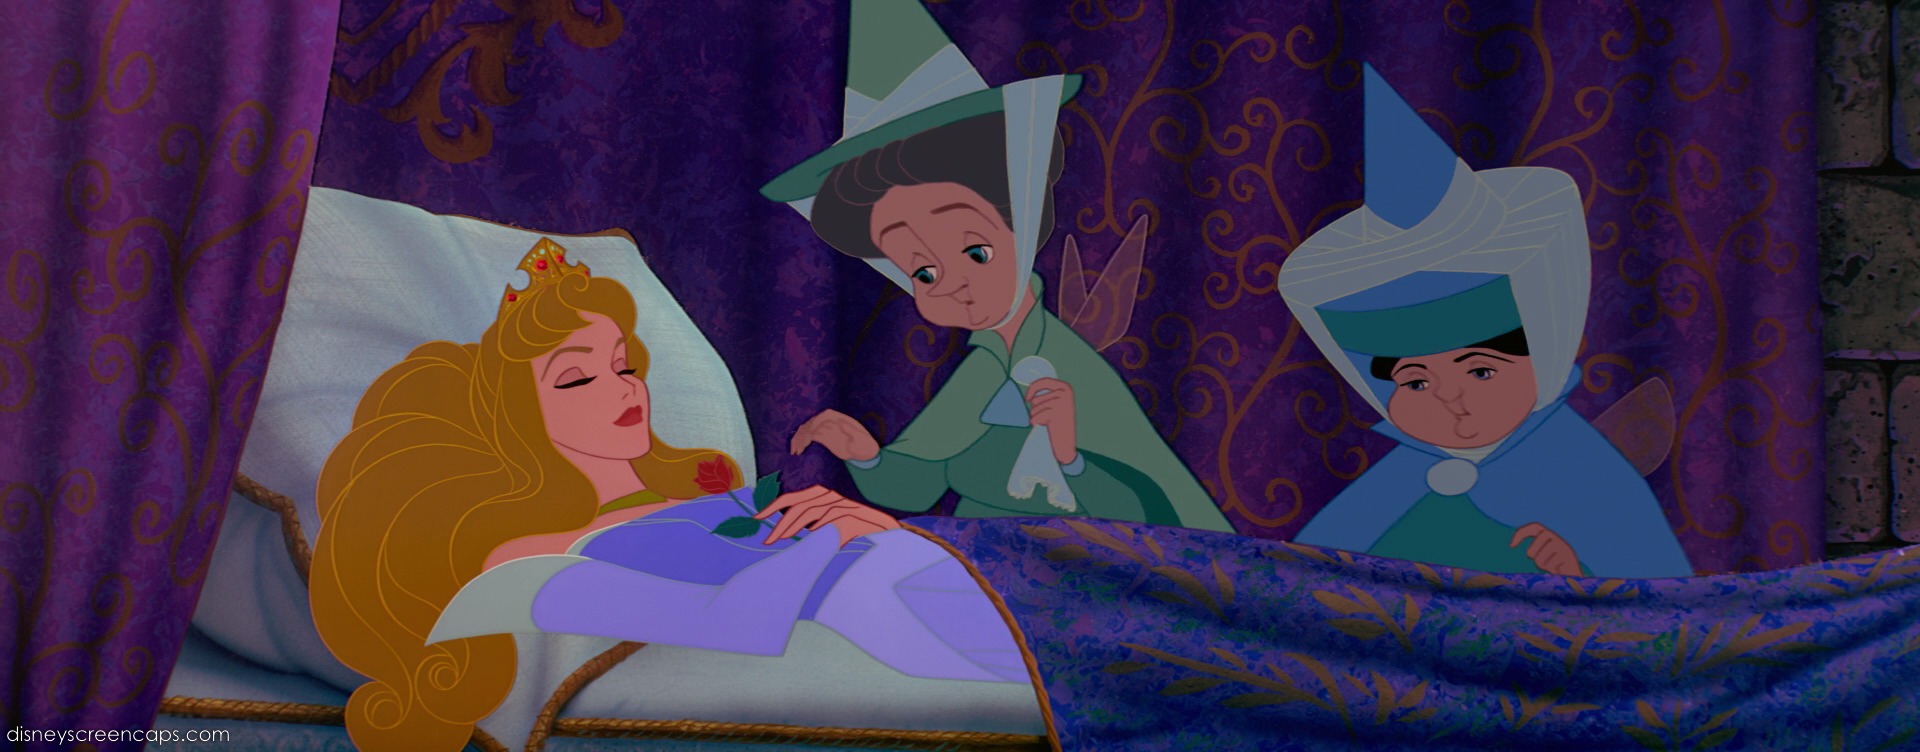 Sleeping Beauty Only Has 18 Lines In The Whole Movie Sleeping Beauty In Bed 1920x752